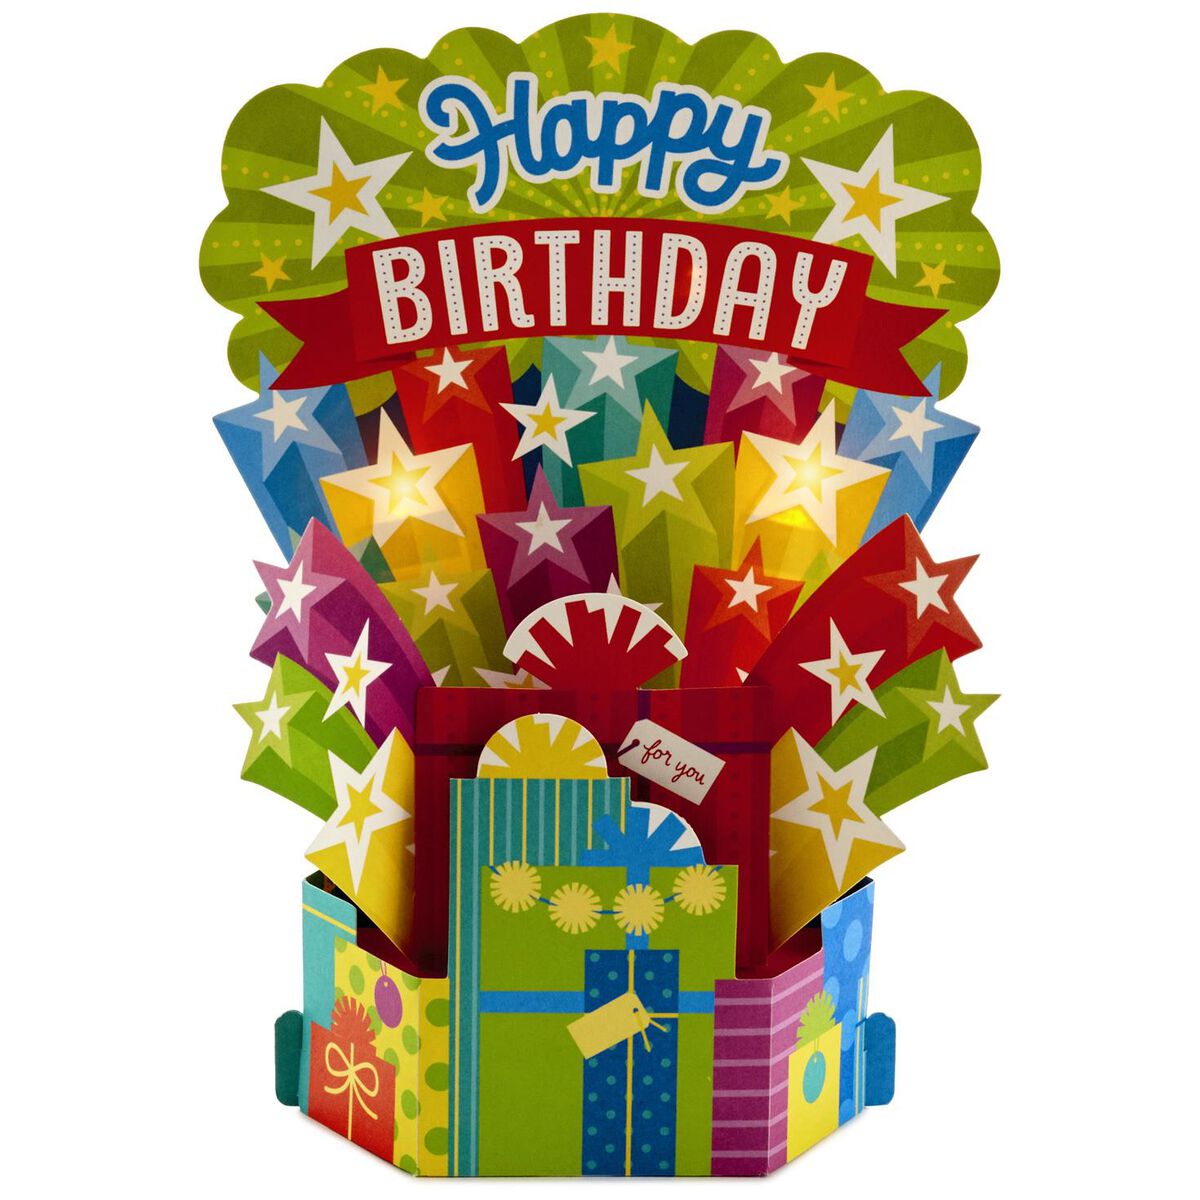 Birthday Cake With Candles Pop Up Musical Birthday Card With Light ...